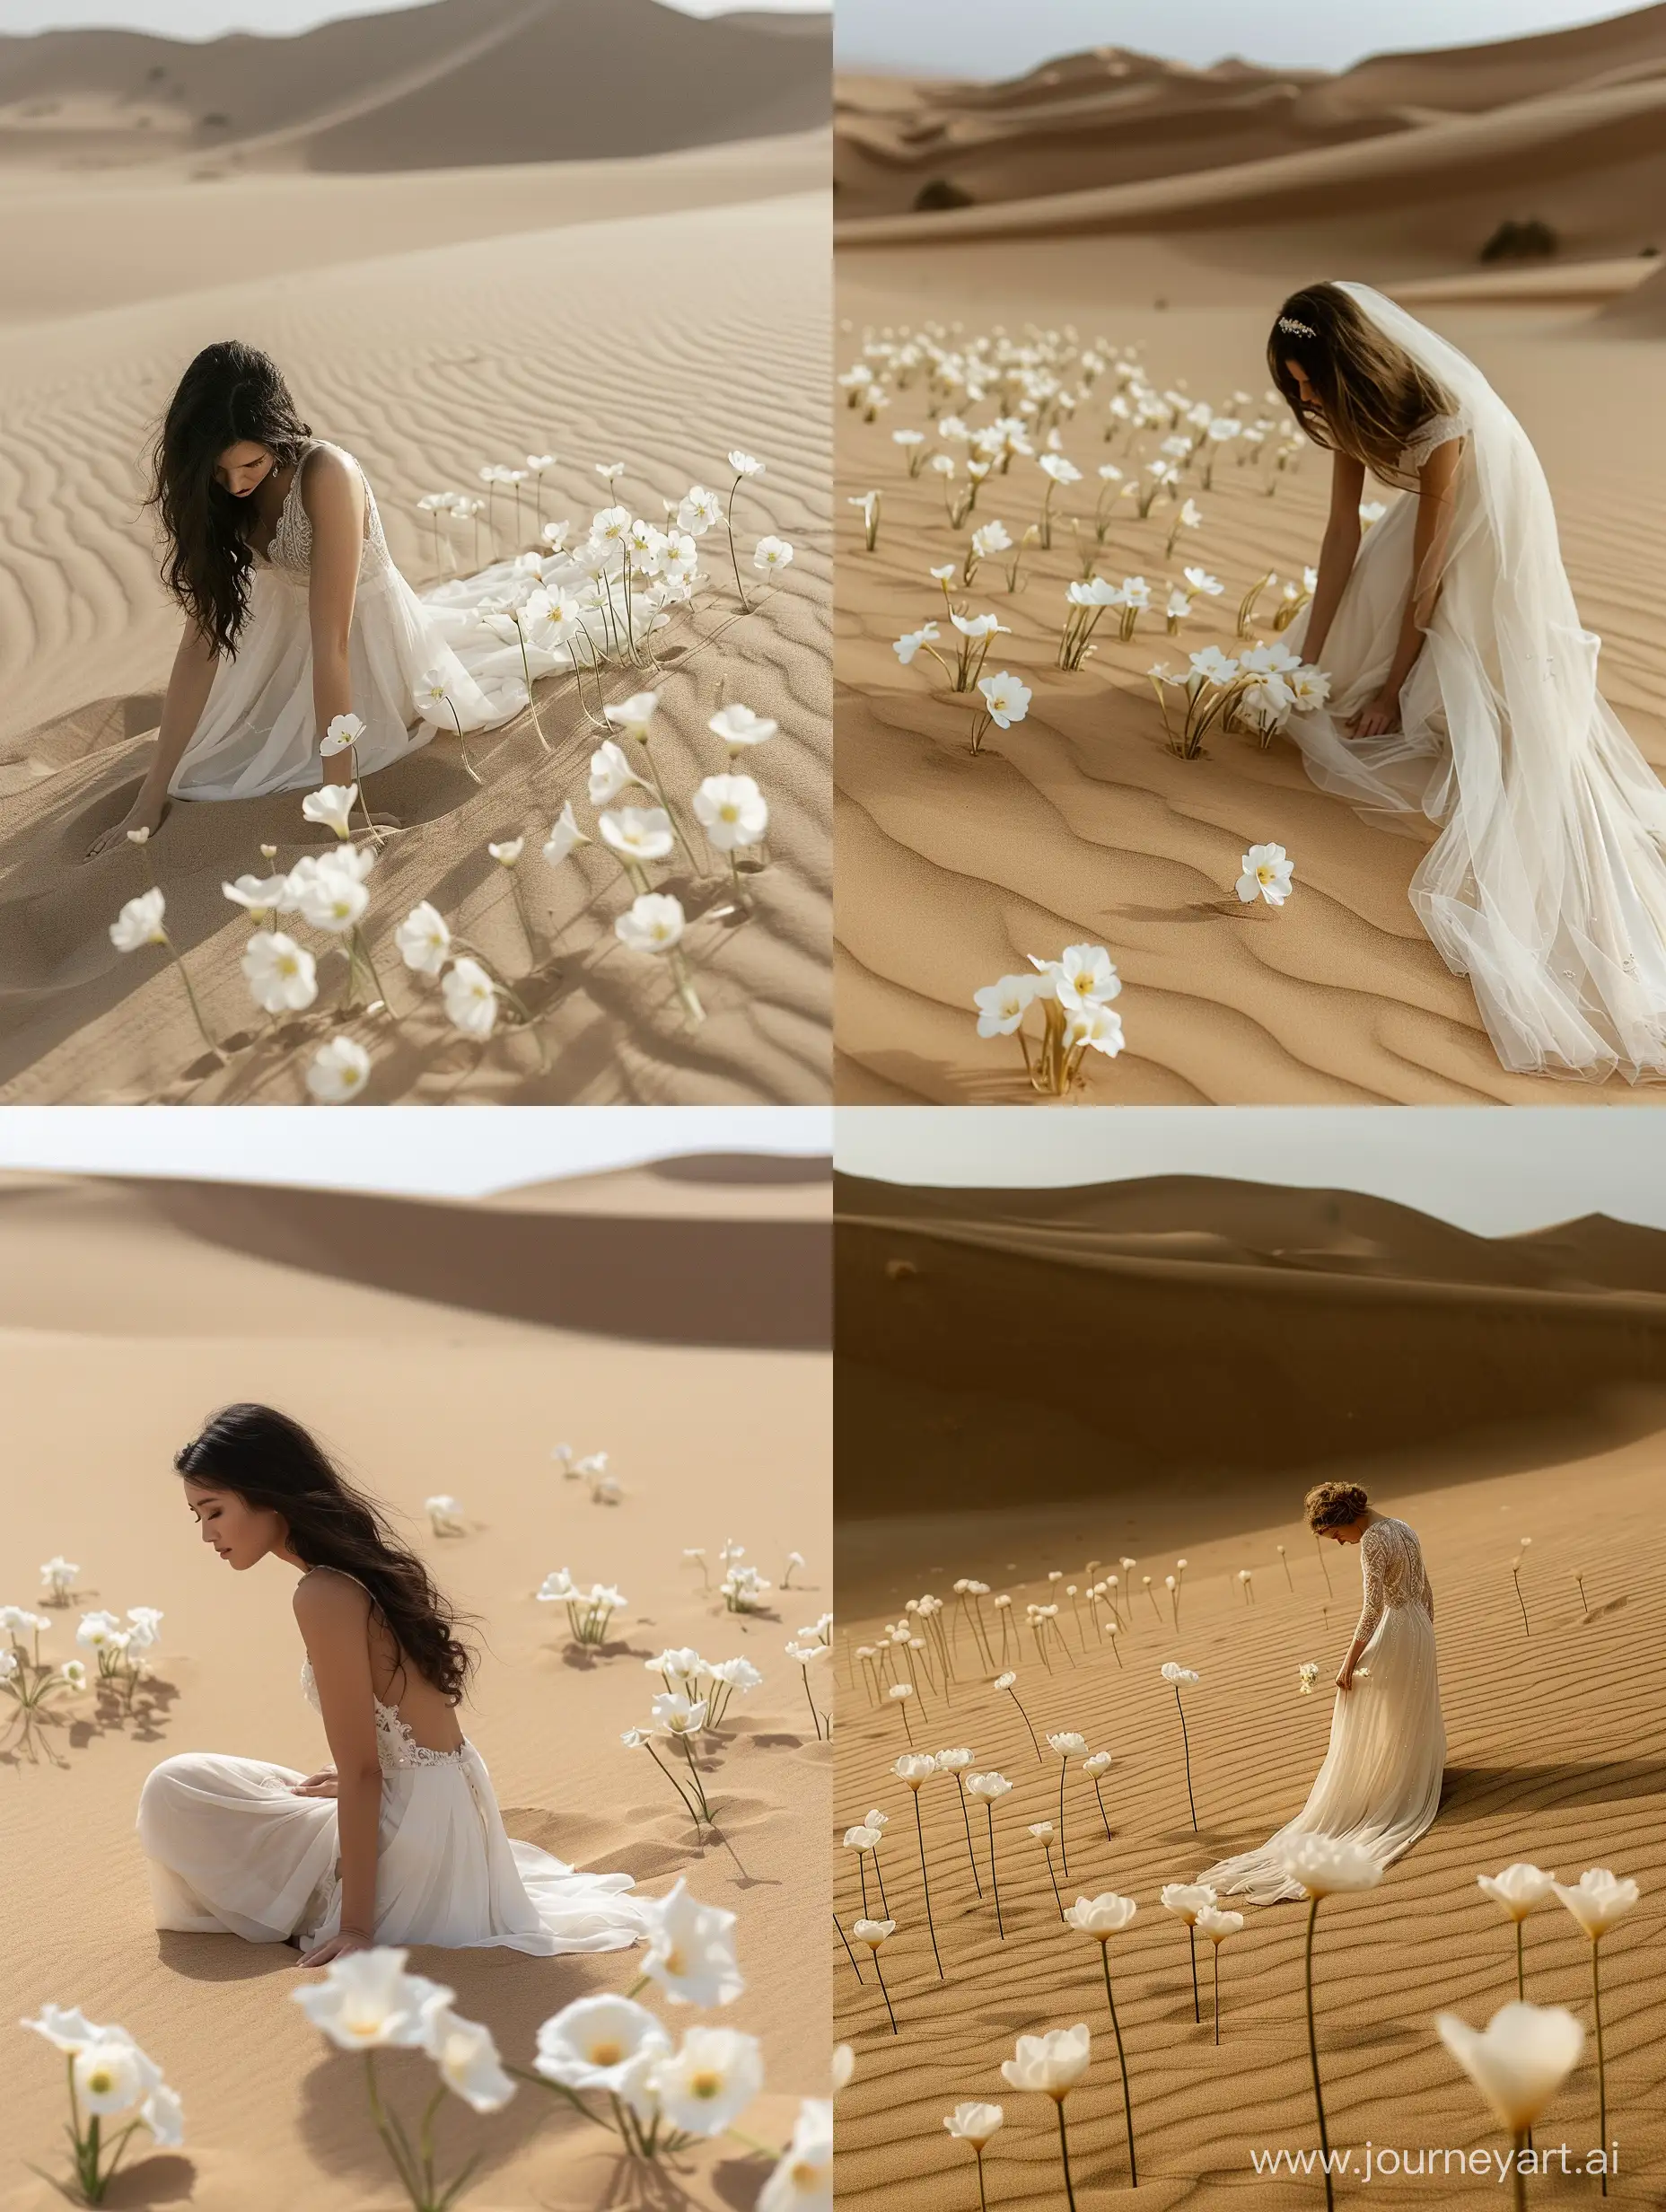 Desert-Bride-Surrounded-by-100-White-Flowers